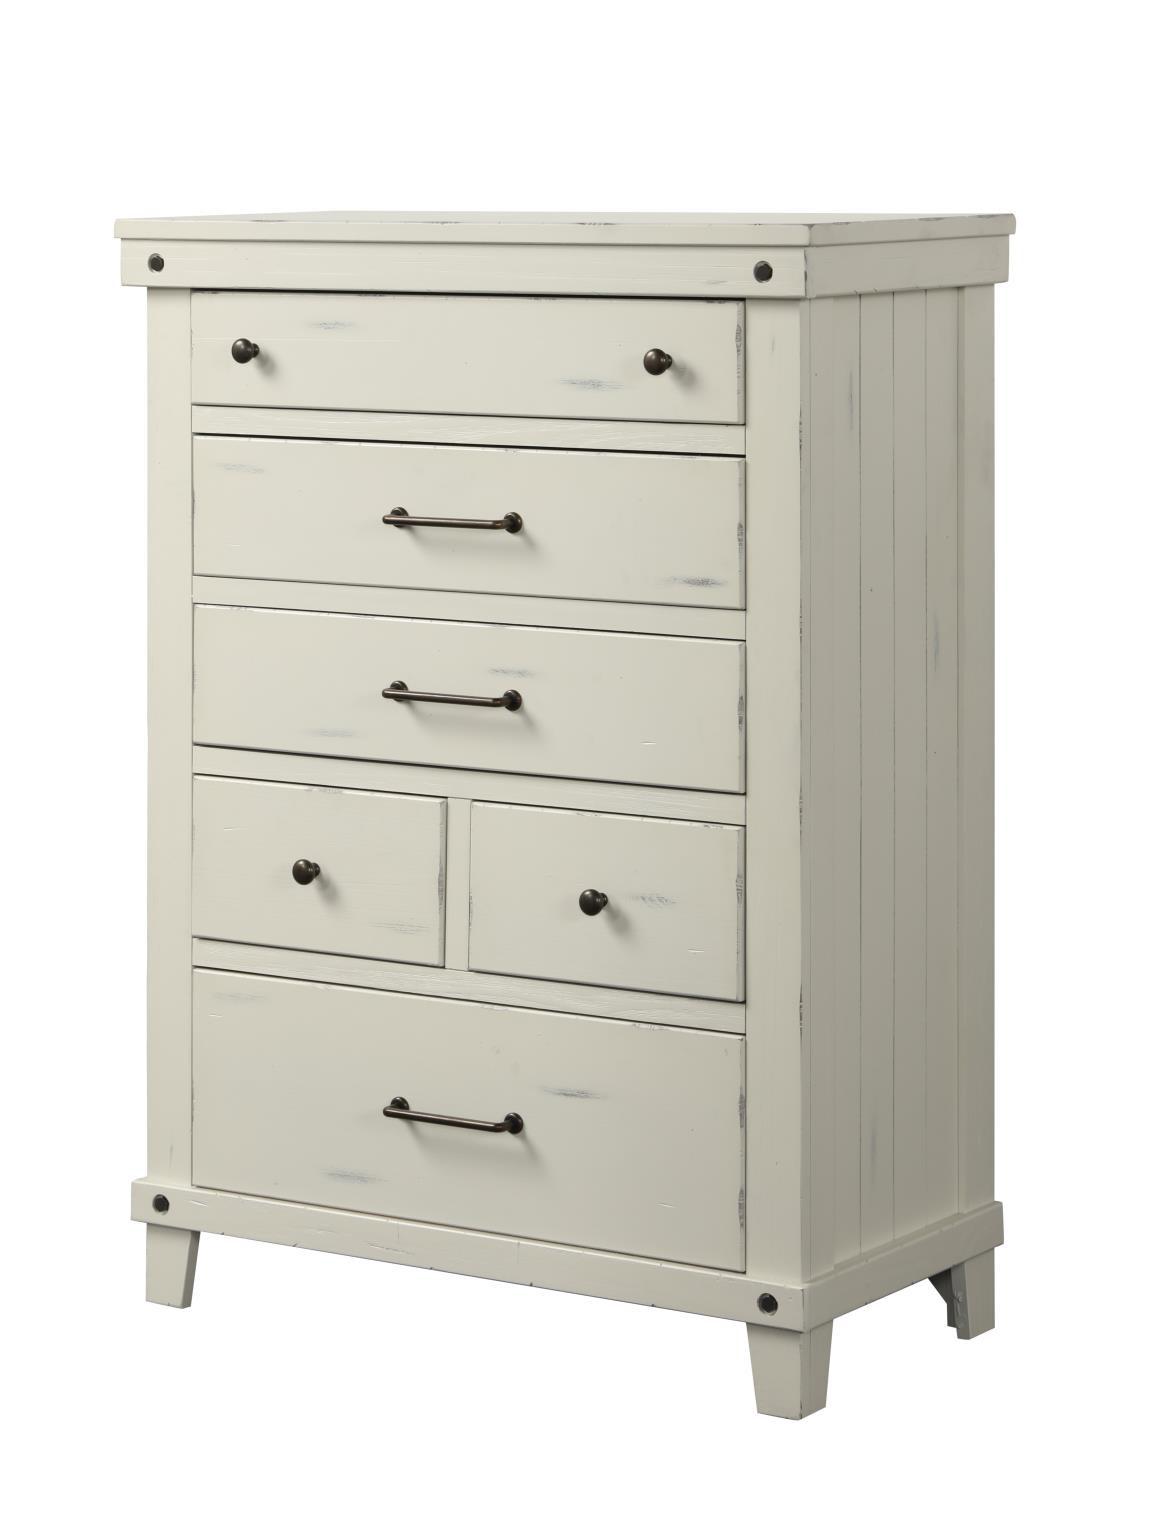 Classic, Transitional Chest SPRUCE CREEK 1709-150 1709-150 in White 